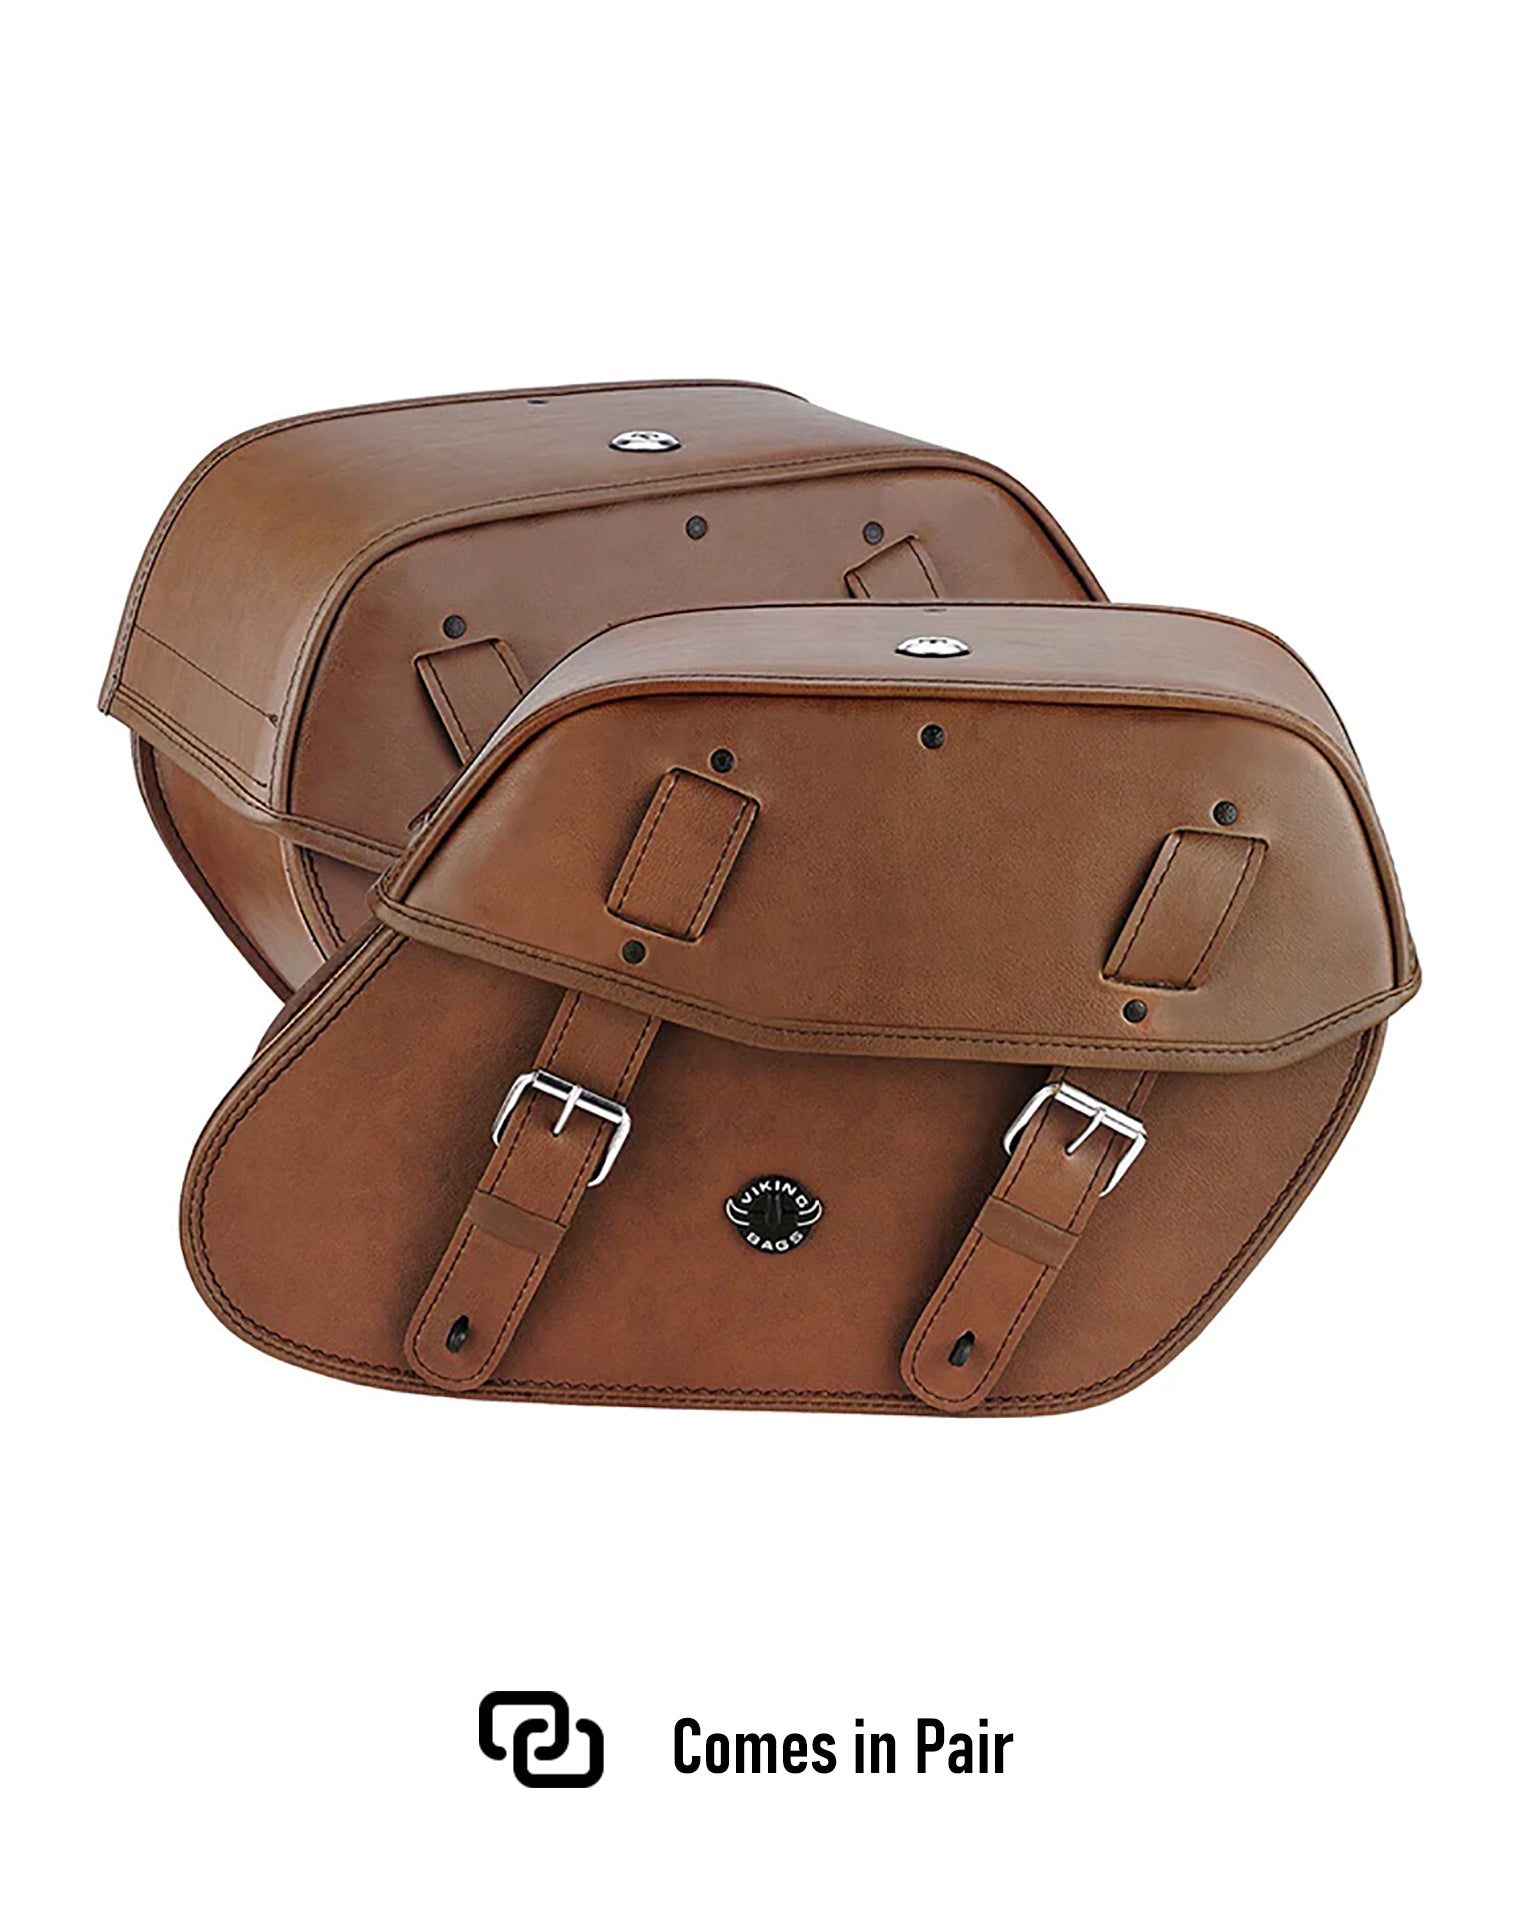 Viking Odin Brown Large Kawasaki Vulcan 800 Classic Leather Motorcycle Saddlebags Weather Resistant Bags Comes in Pair